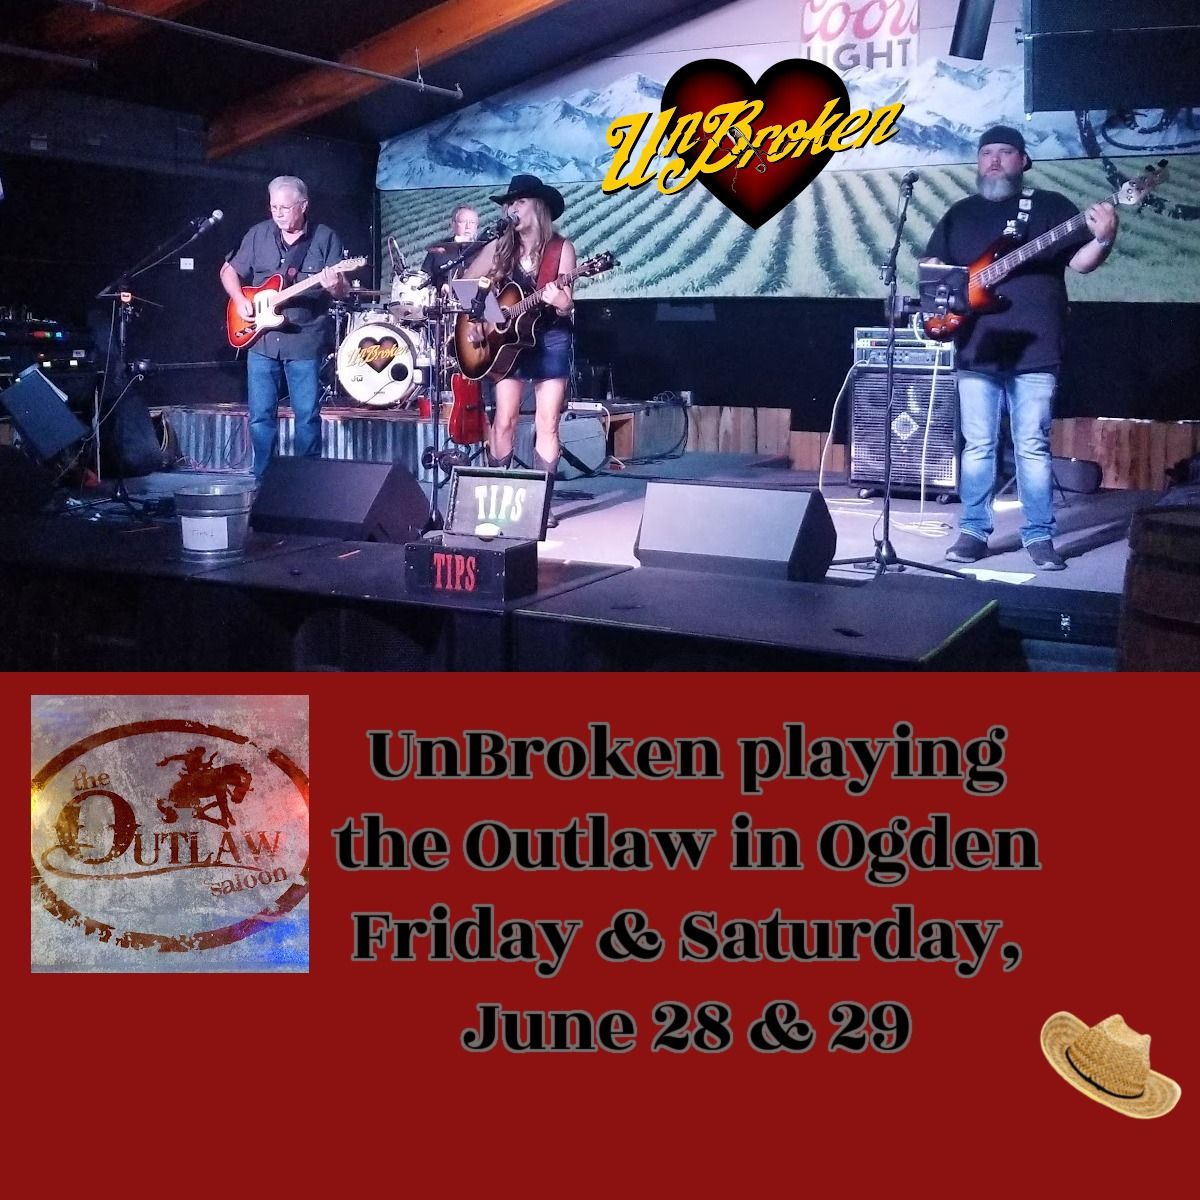 UnBroken playing the Outlaw Saloon Friday & Saturday June 28 & 29